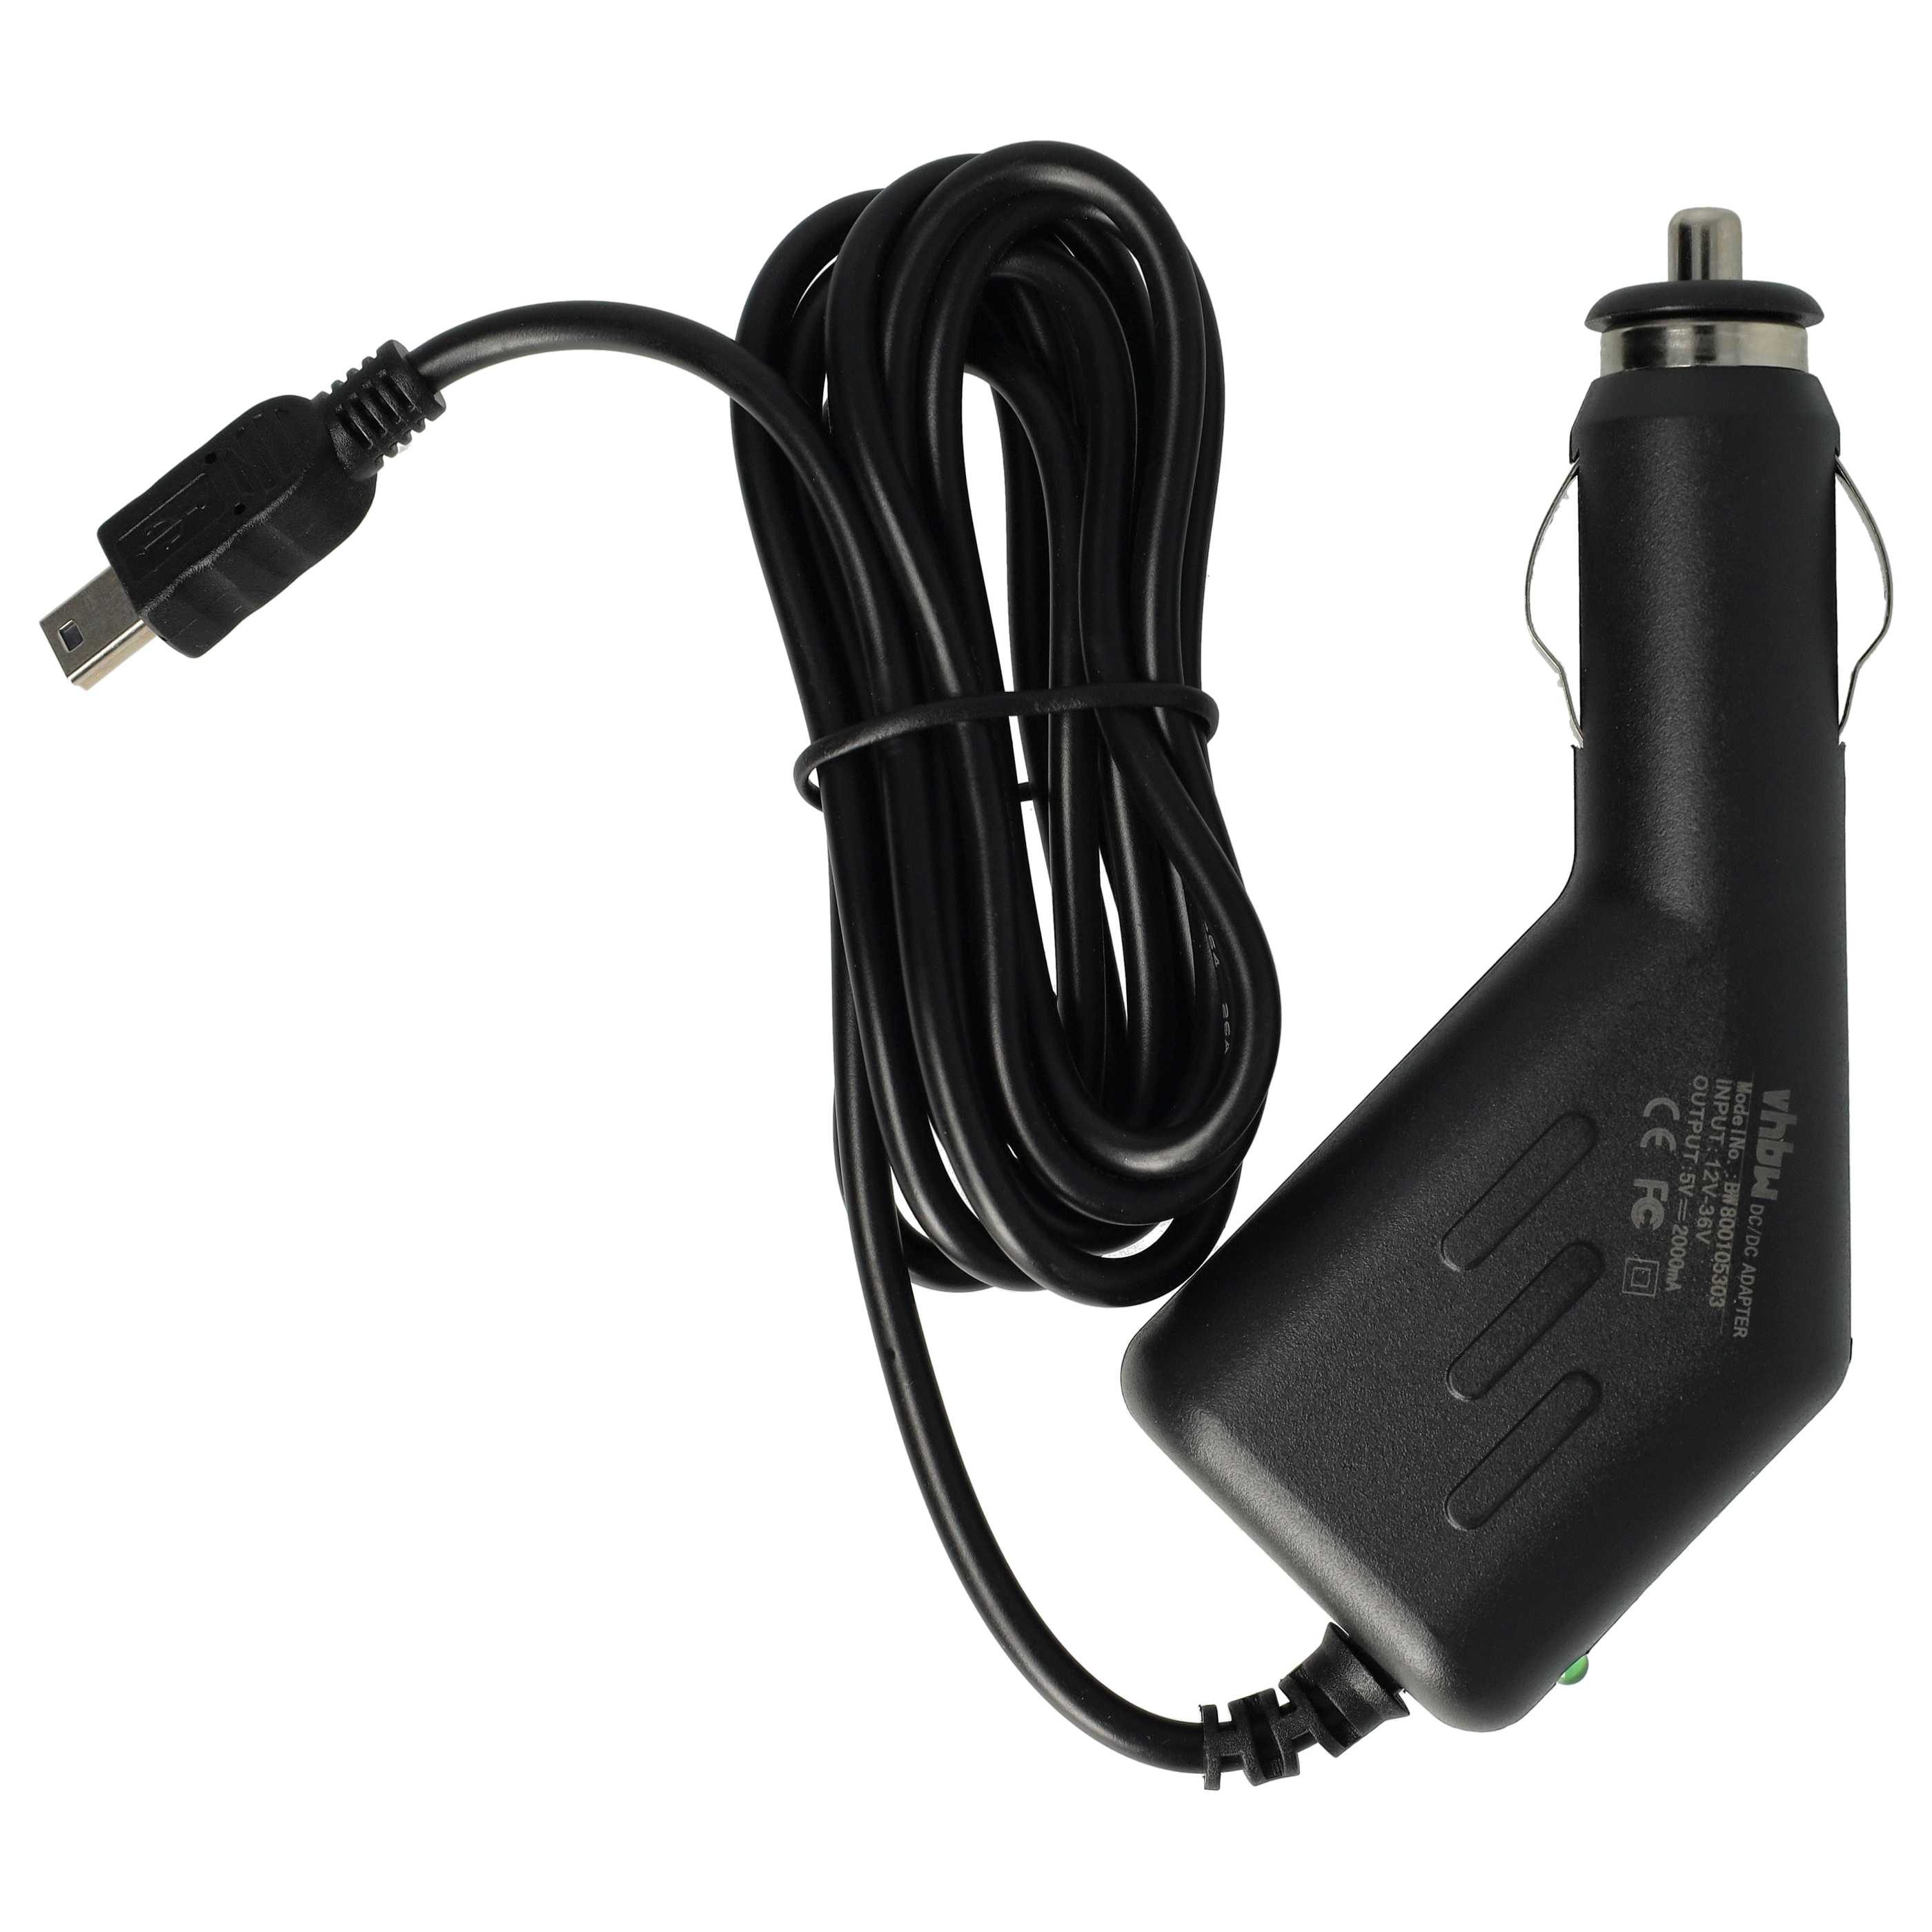 Mini-USB Car Charger Cable 2.0 A suitable forDevices like GPS, Sat Navs